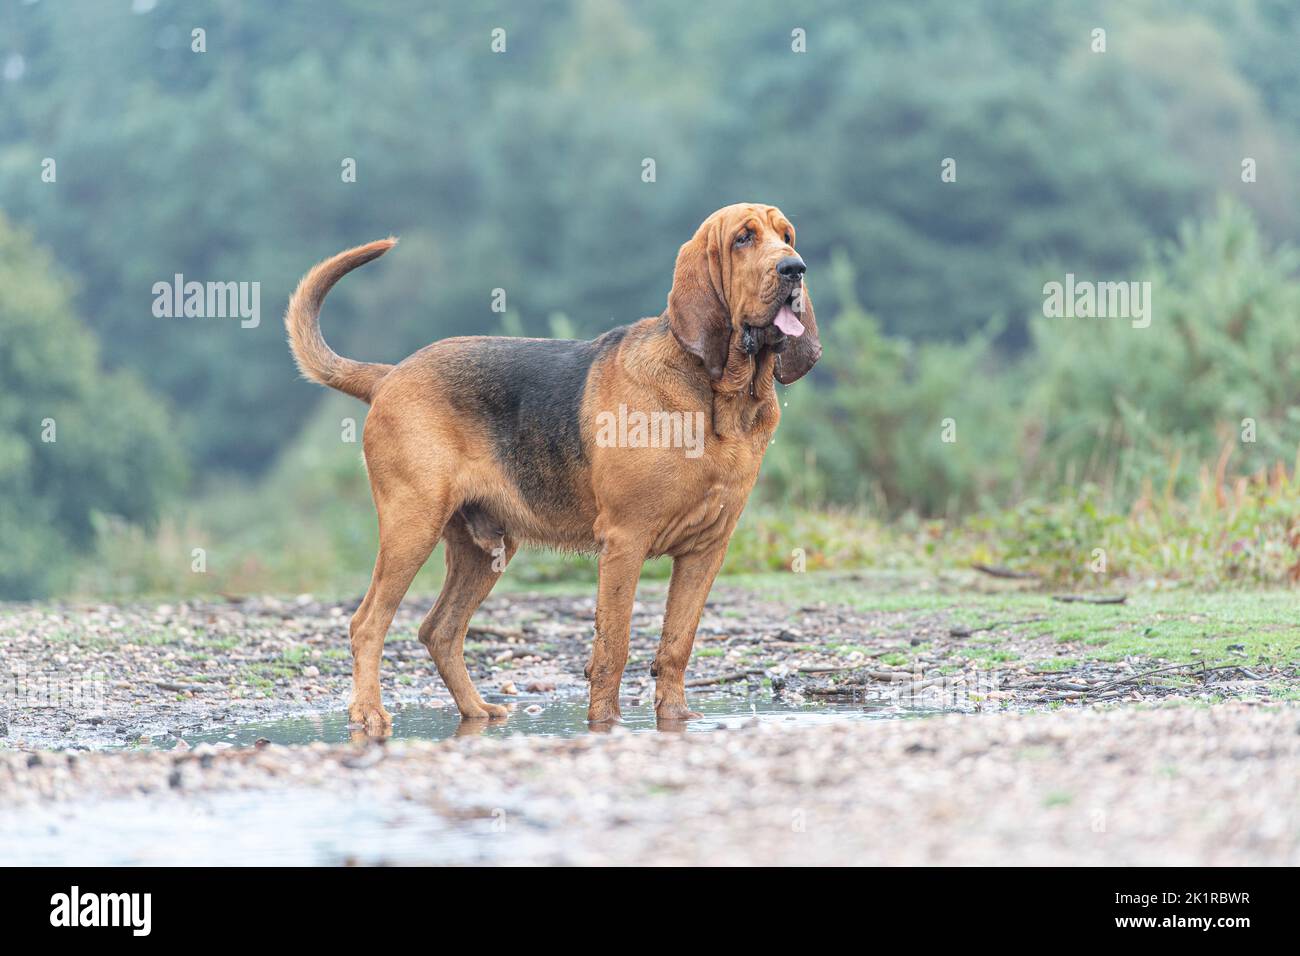 bloodhound dog standing in country setting Stock Photo